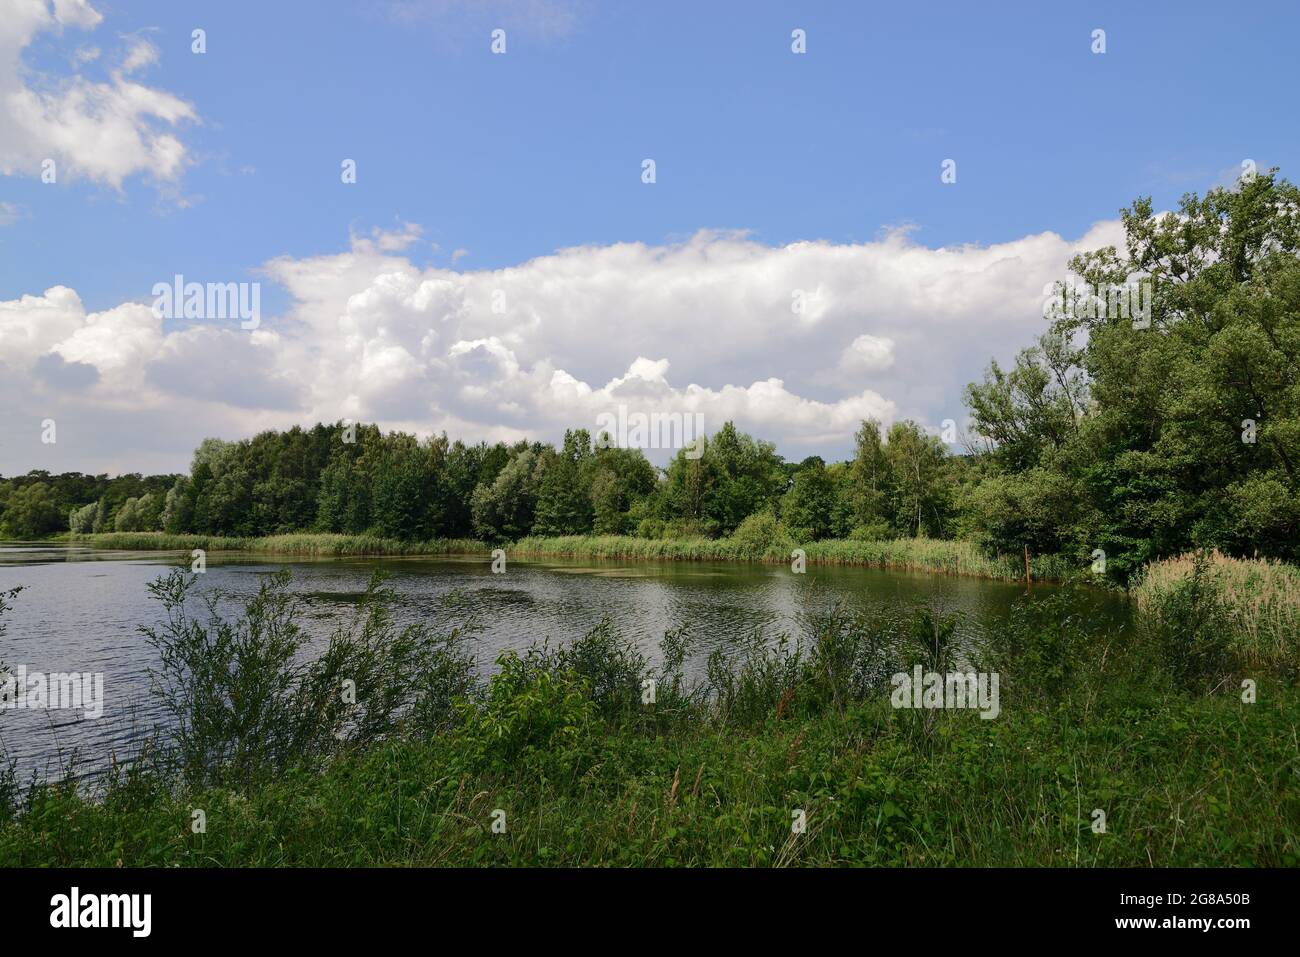 Windstiller See an einem Wald bei sonnigem Wetter, blauem Himmel, Windless lake in a forest in sunny weather, blue sky with white clouds Stock Photo